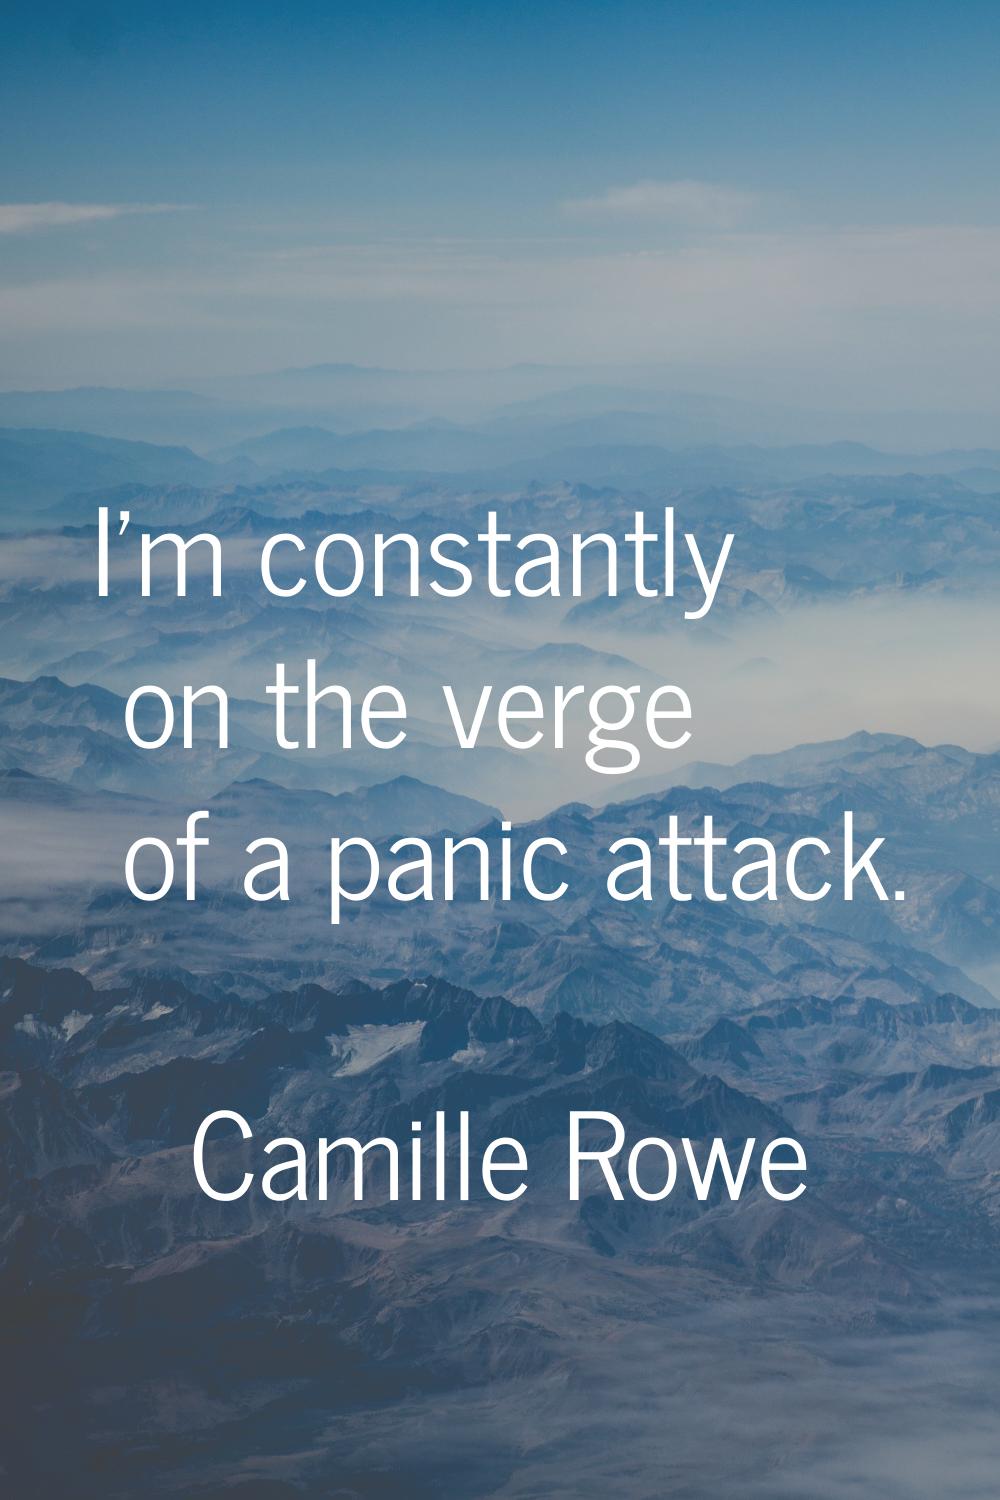 I'm constantly on the verge of a panic attack.